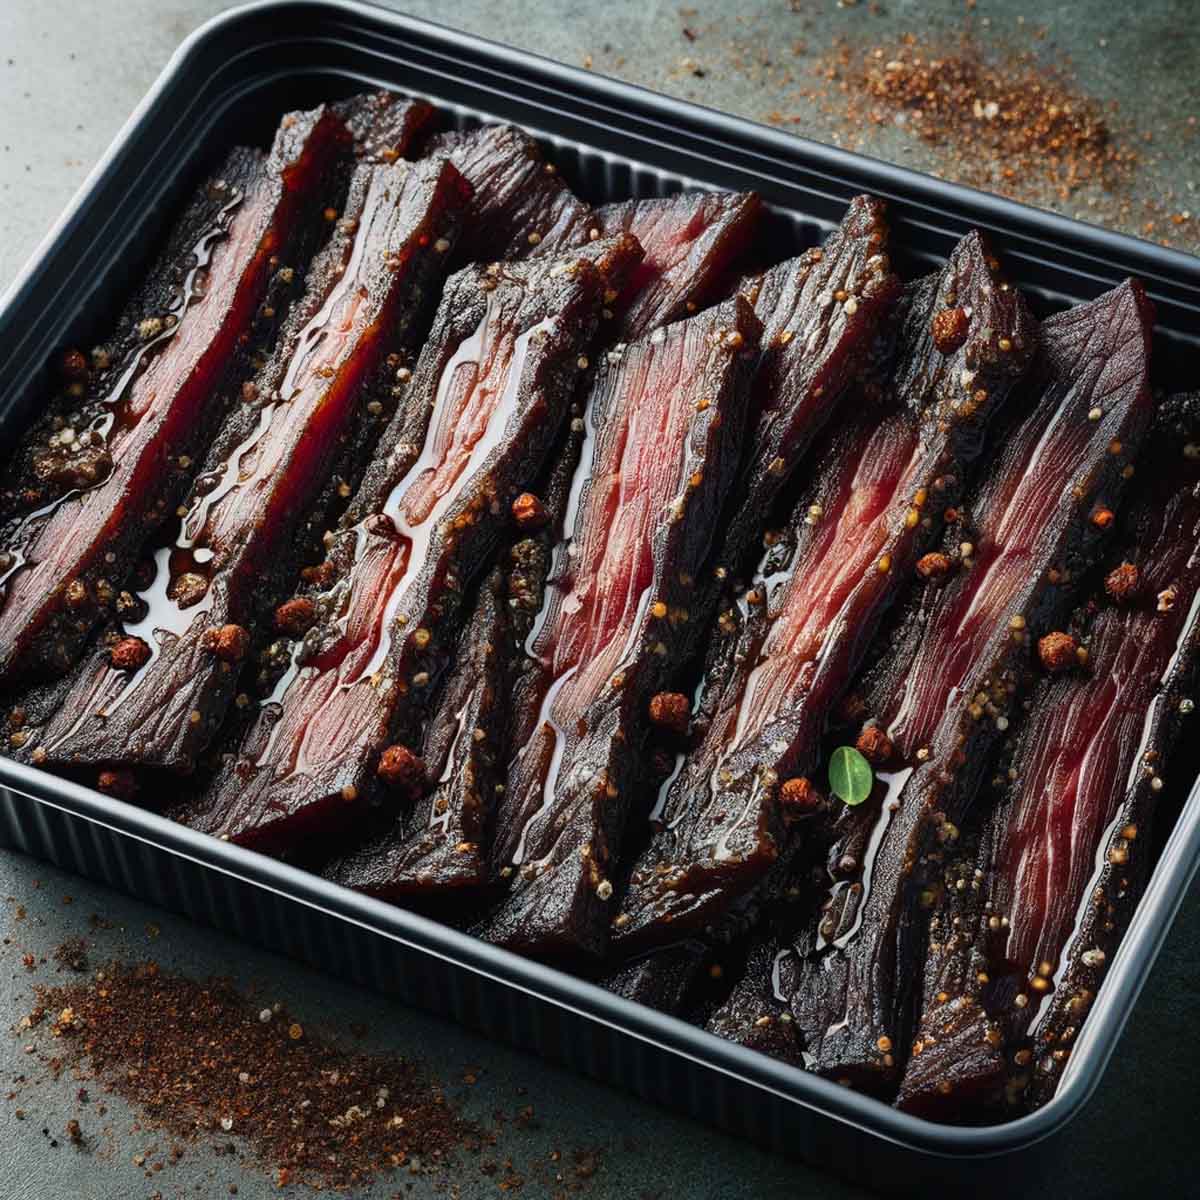 Marinated beef jerky strips in an airtight container, each piece evenly coated with a wet, shiny, herb-infused marinade.